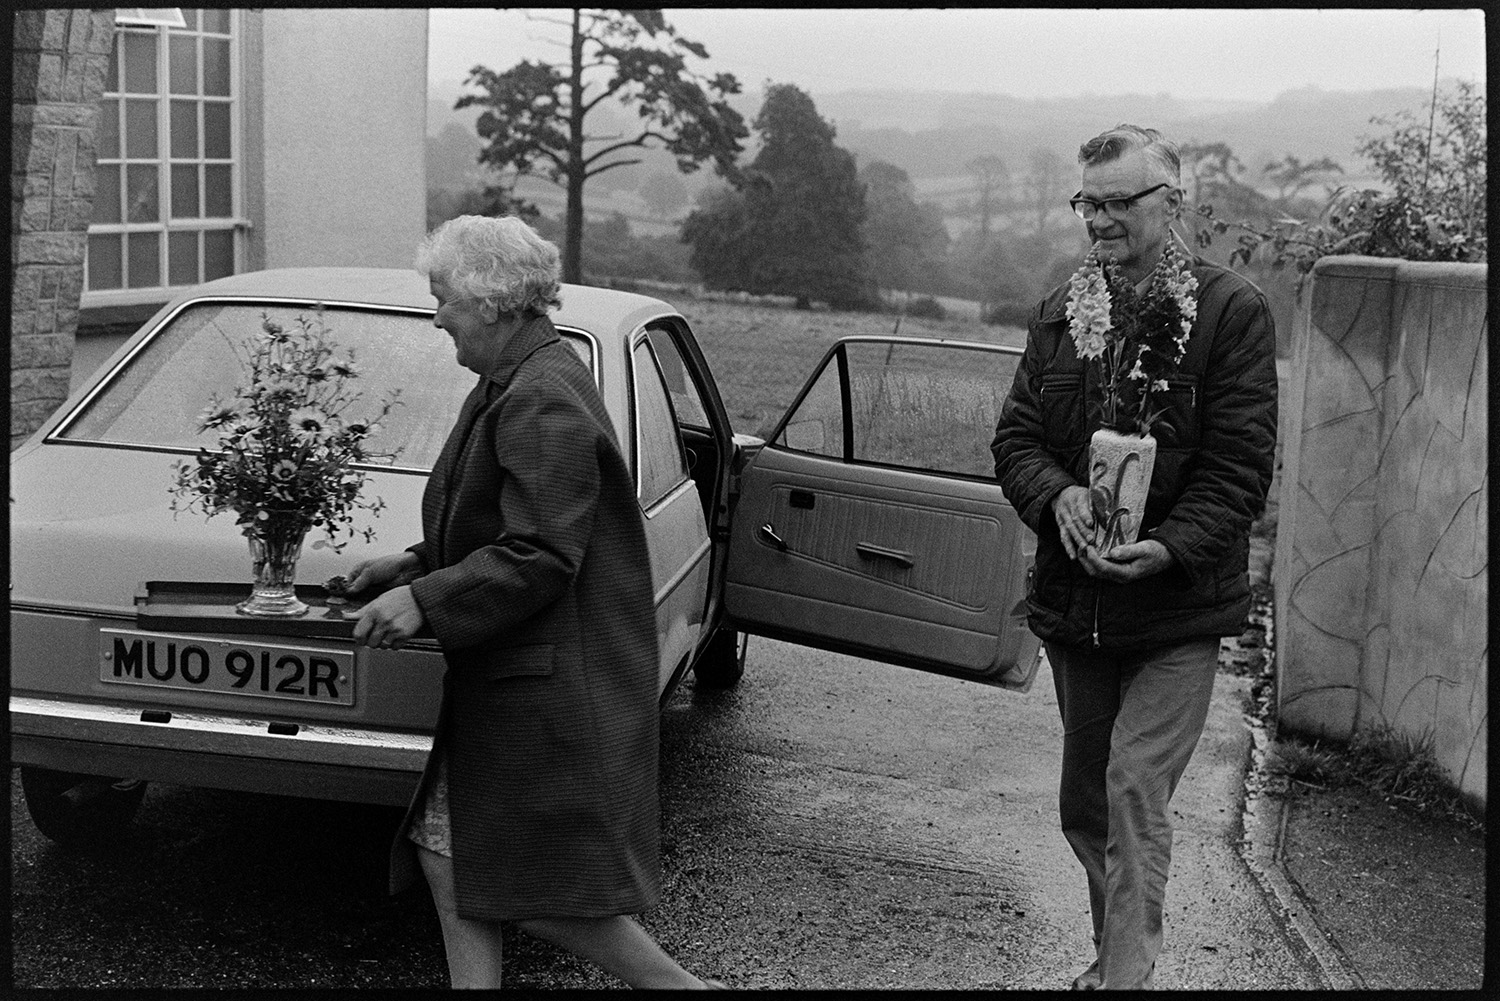 People bringing in entries for Flower show at village hall from cars. 
[A man and woman carrying vases of flowers from a parked car into Dolton Flower Show, at Dolton Village Hall.]